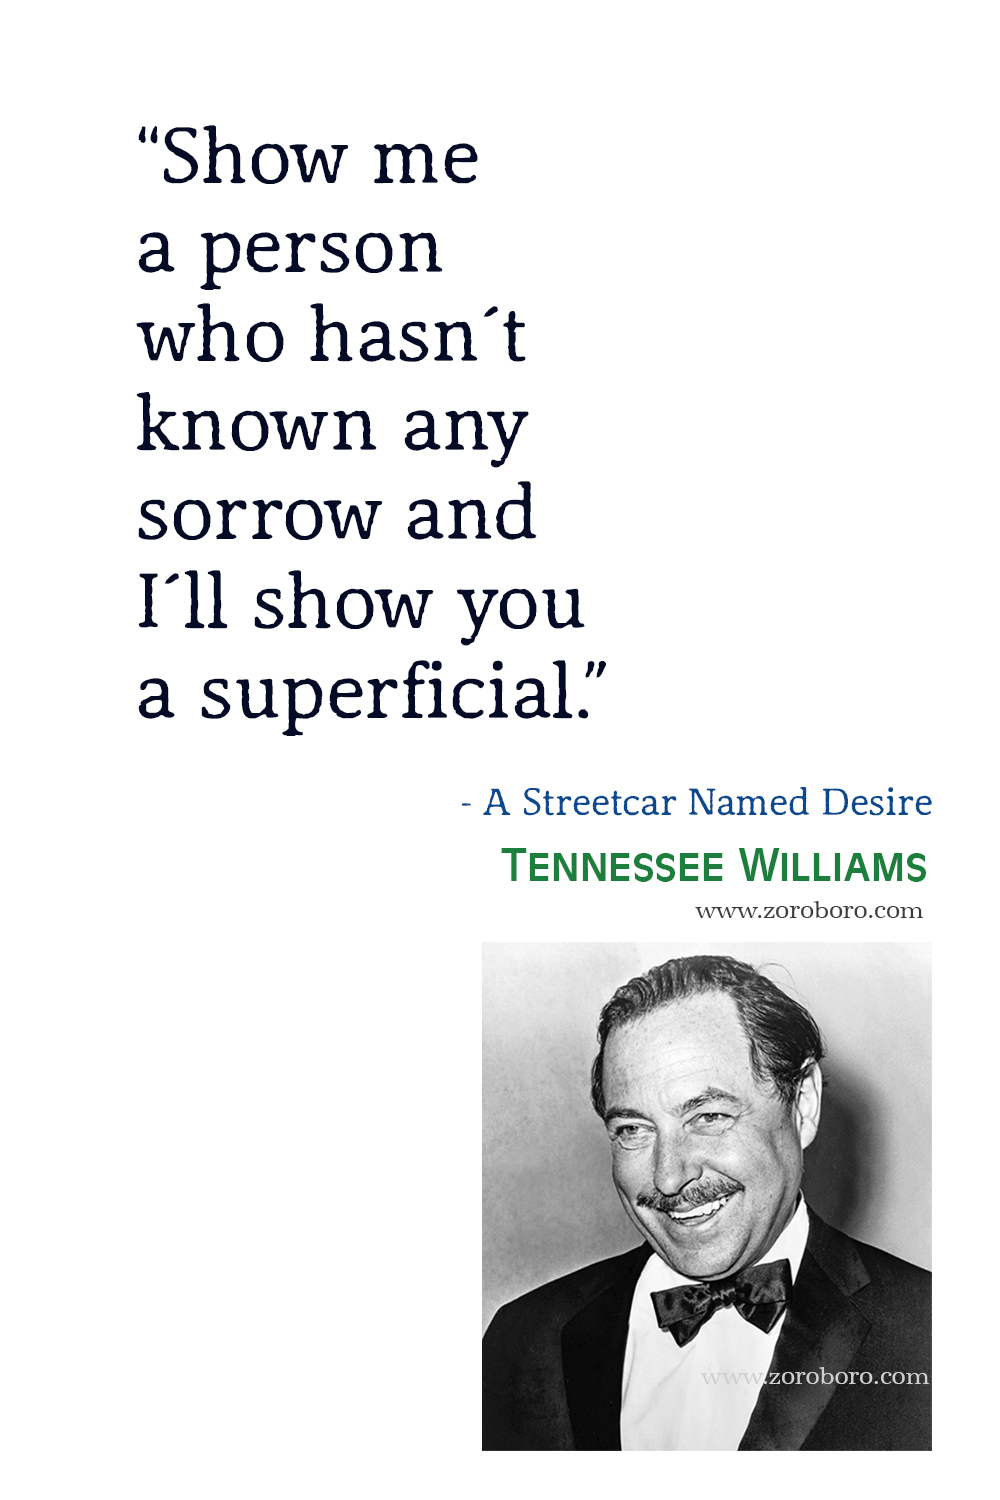 Tennessee Williams Quotes, Tennessee Williams Books Quotes, Tennessee Williams A Streetcar Named Desire, Love, Life, Happiness & Success Quotes, Tennessee Williams Poems, Poetry, Tennessee Williams The Glass Menagerie Quotes, Tennessee Williams Cat on a Hot Tin Roof Quotes.